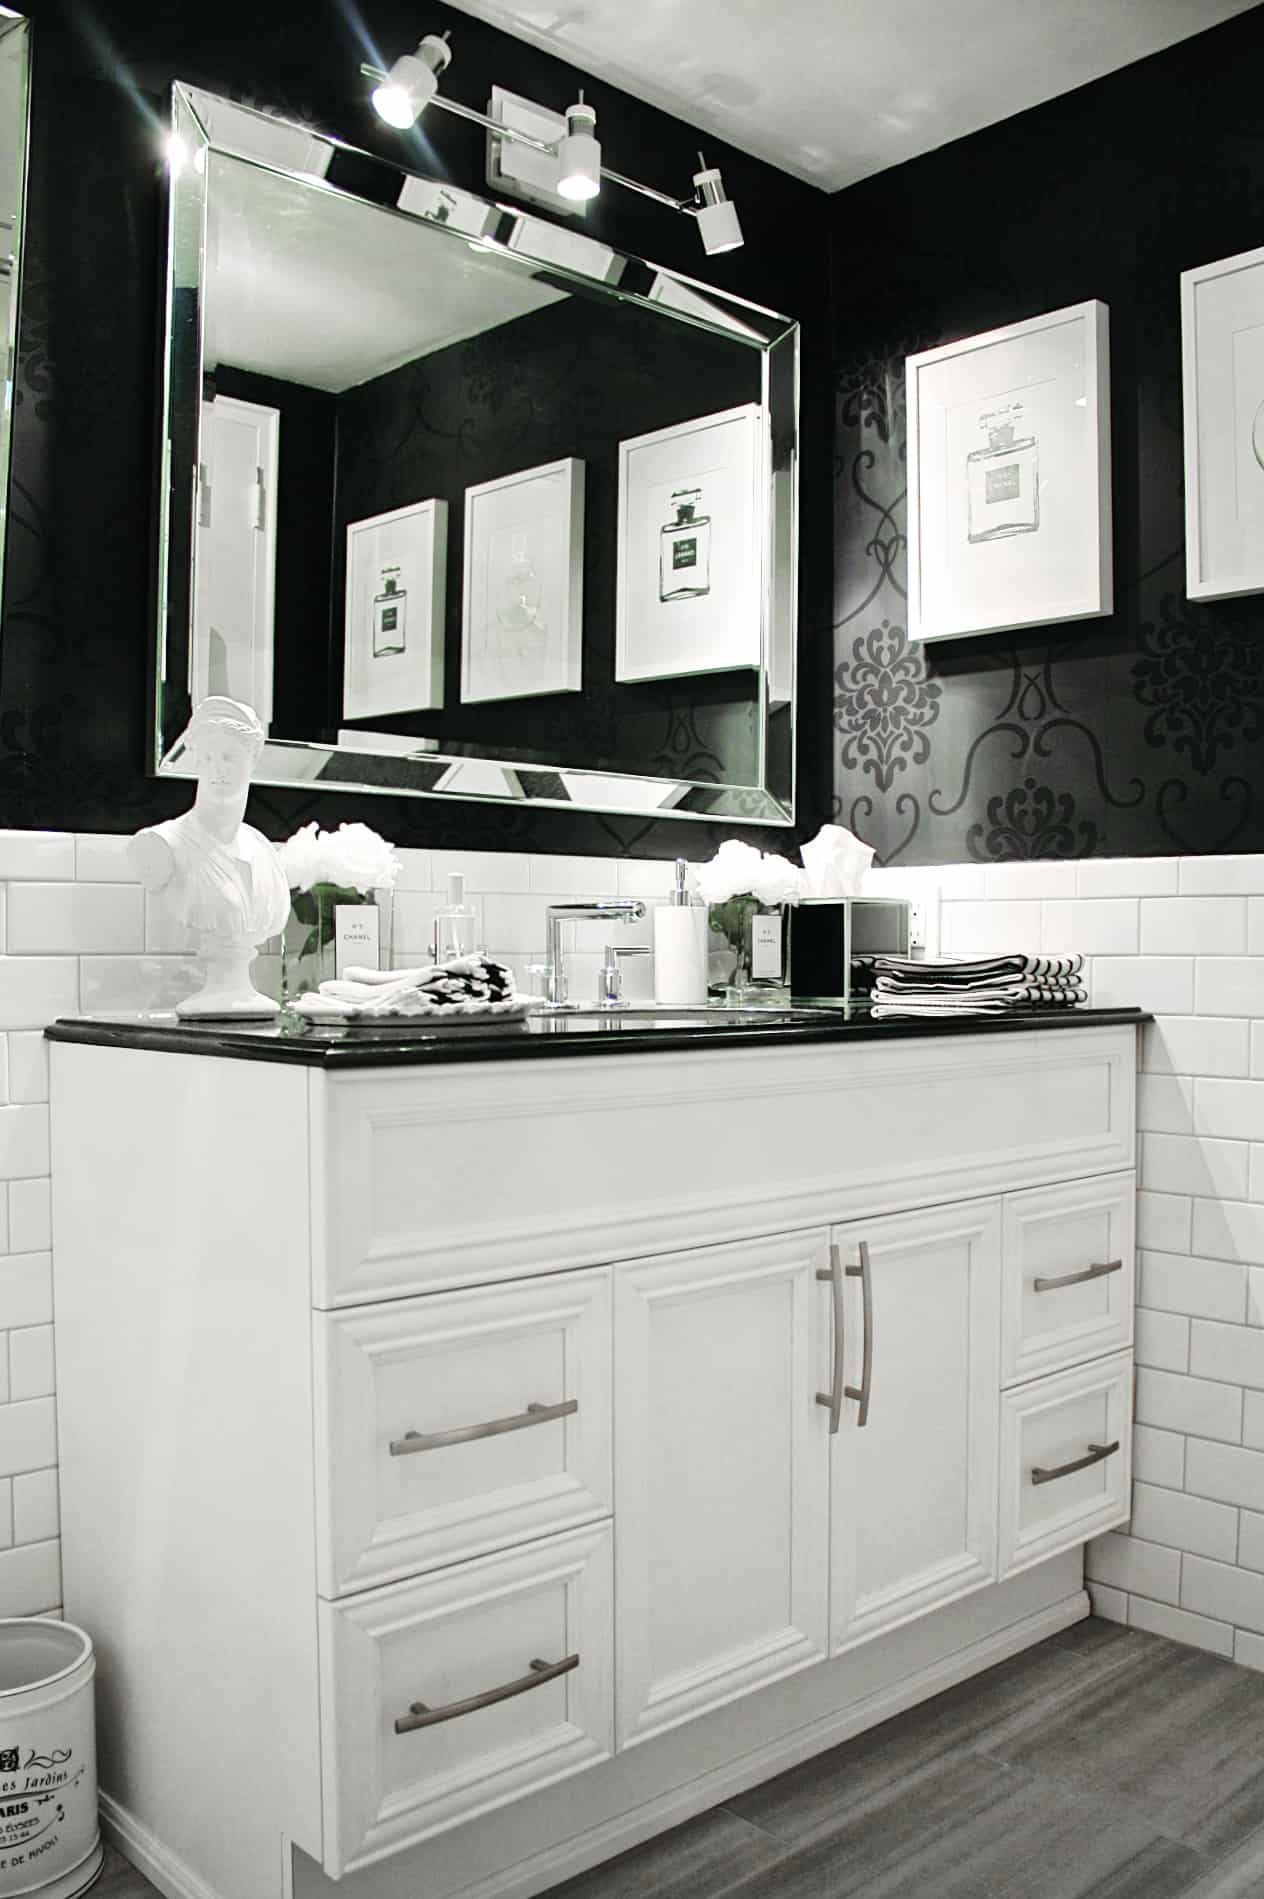 The Pure Bathroom Collection Introduce Bathrooms Inspired By Art Deco - UK  Home IdeasUK Home Ideas